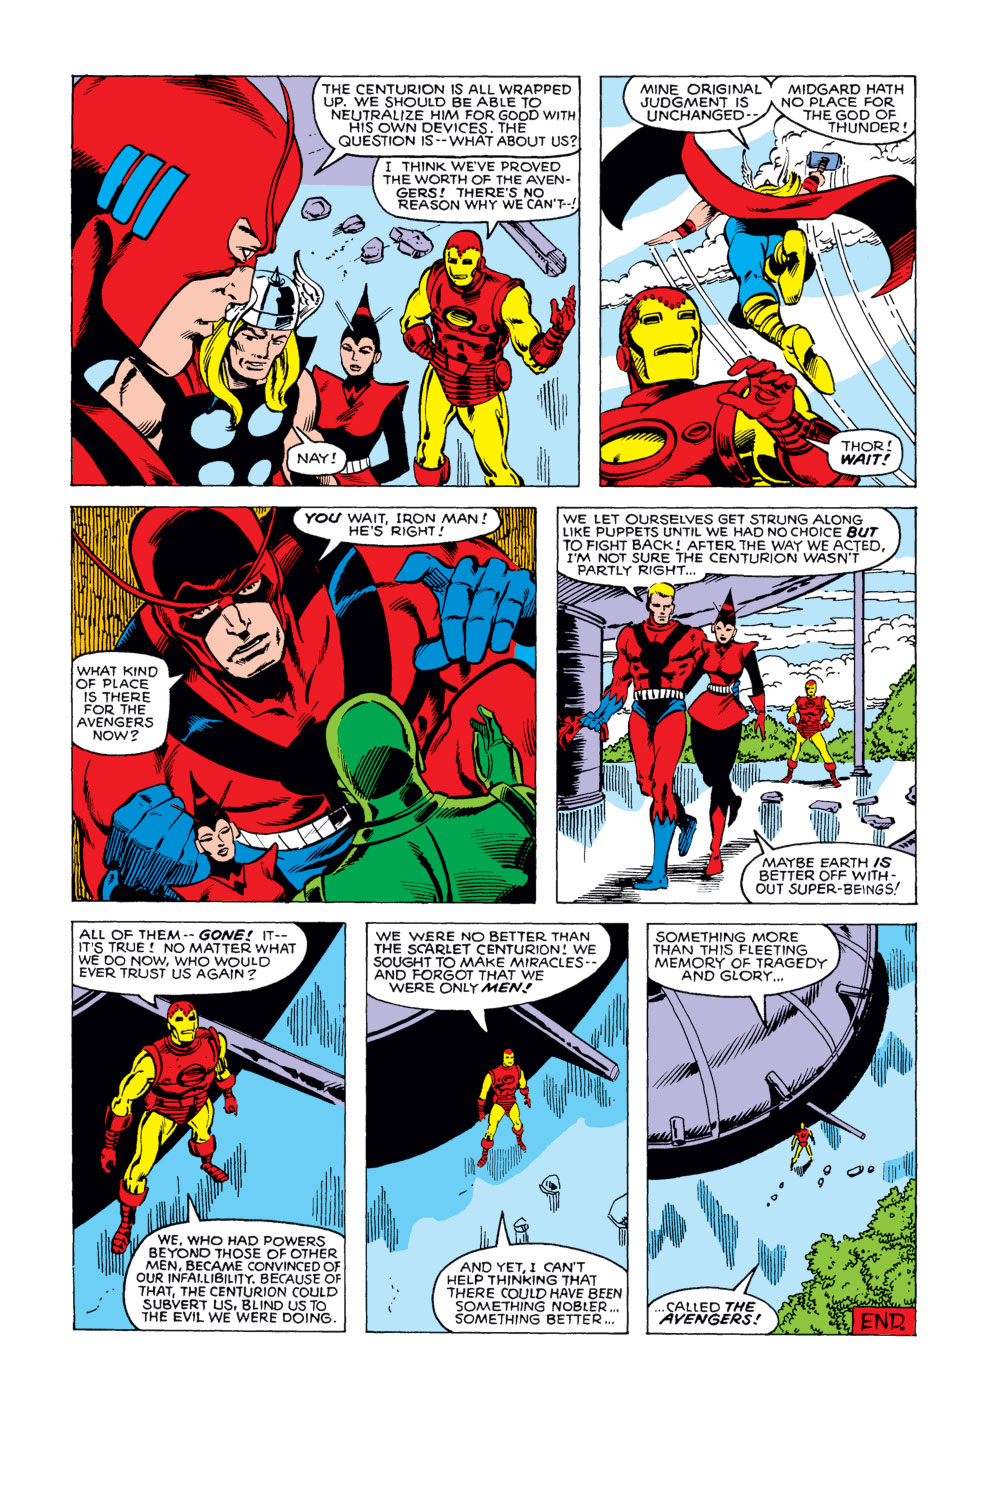 What If? (1977) issue 29 - The Avengers defeated everybody - Page 20